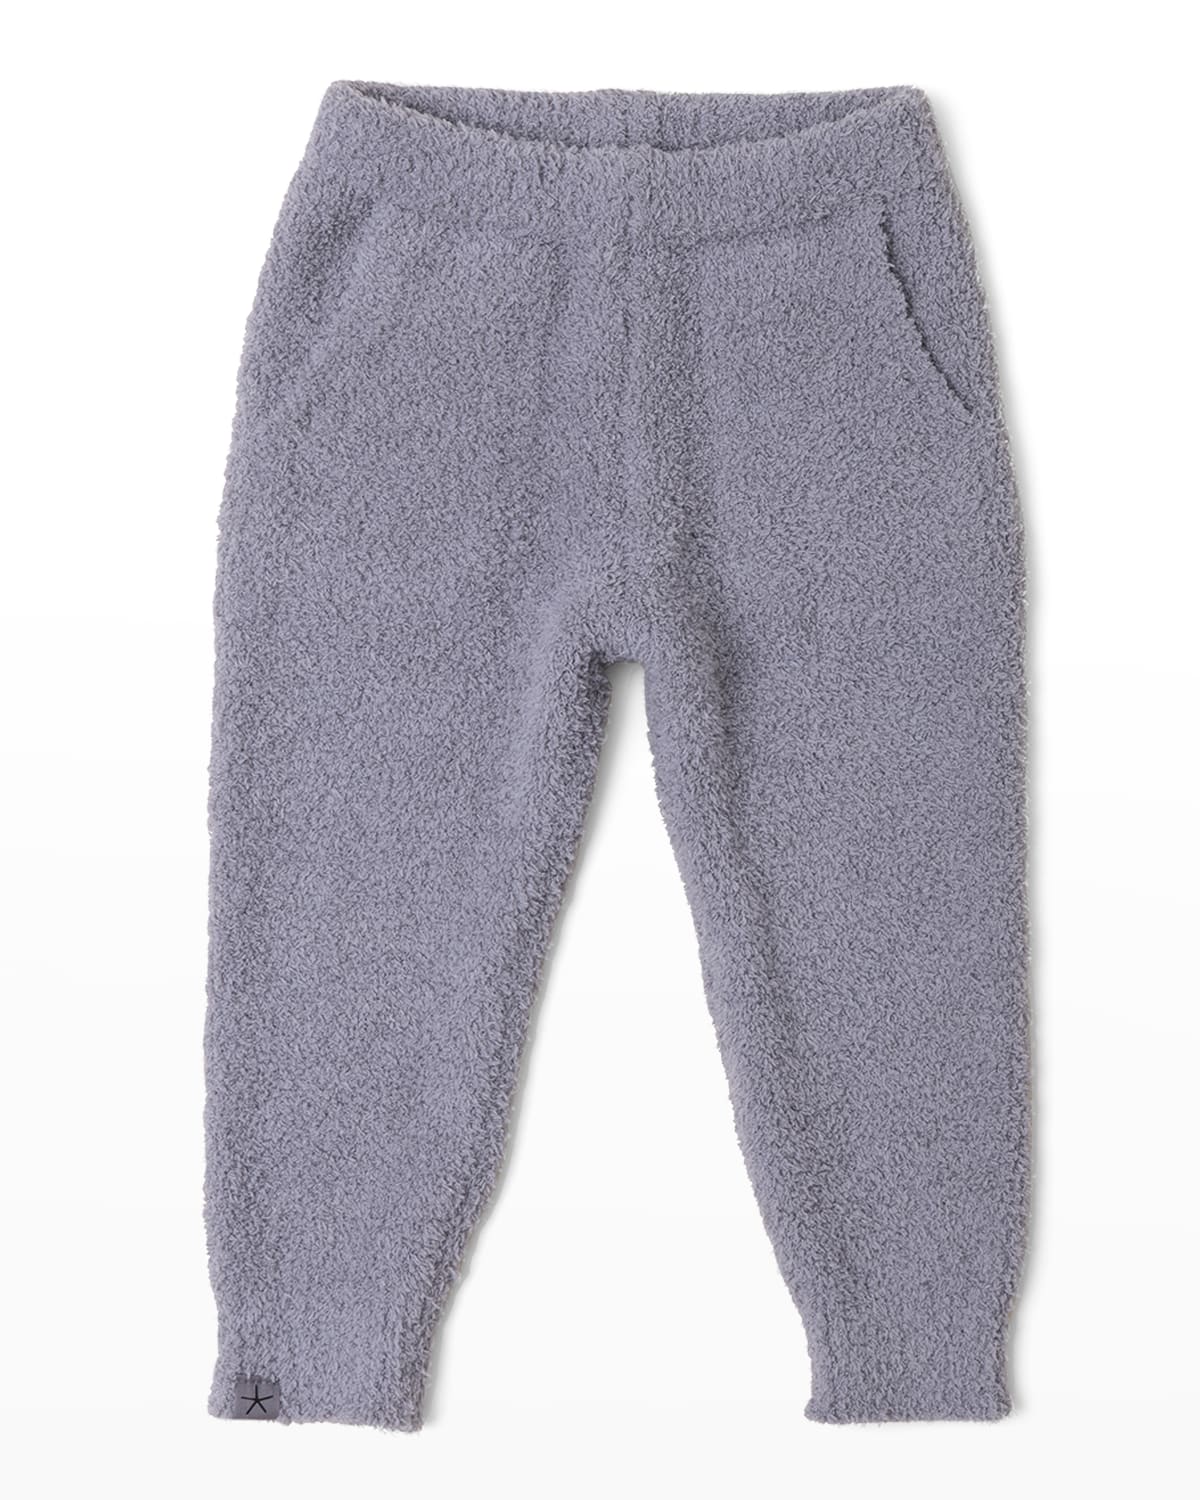 BAREFOOT DREAMS KID'S SOLID JOGGERS